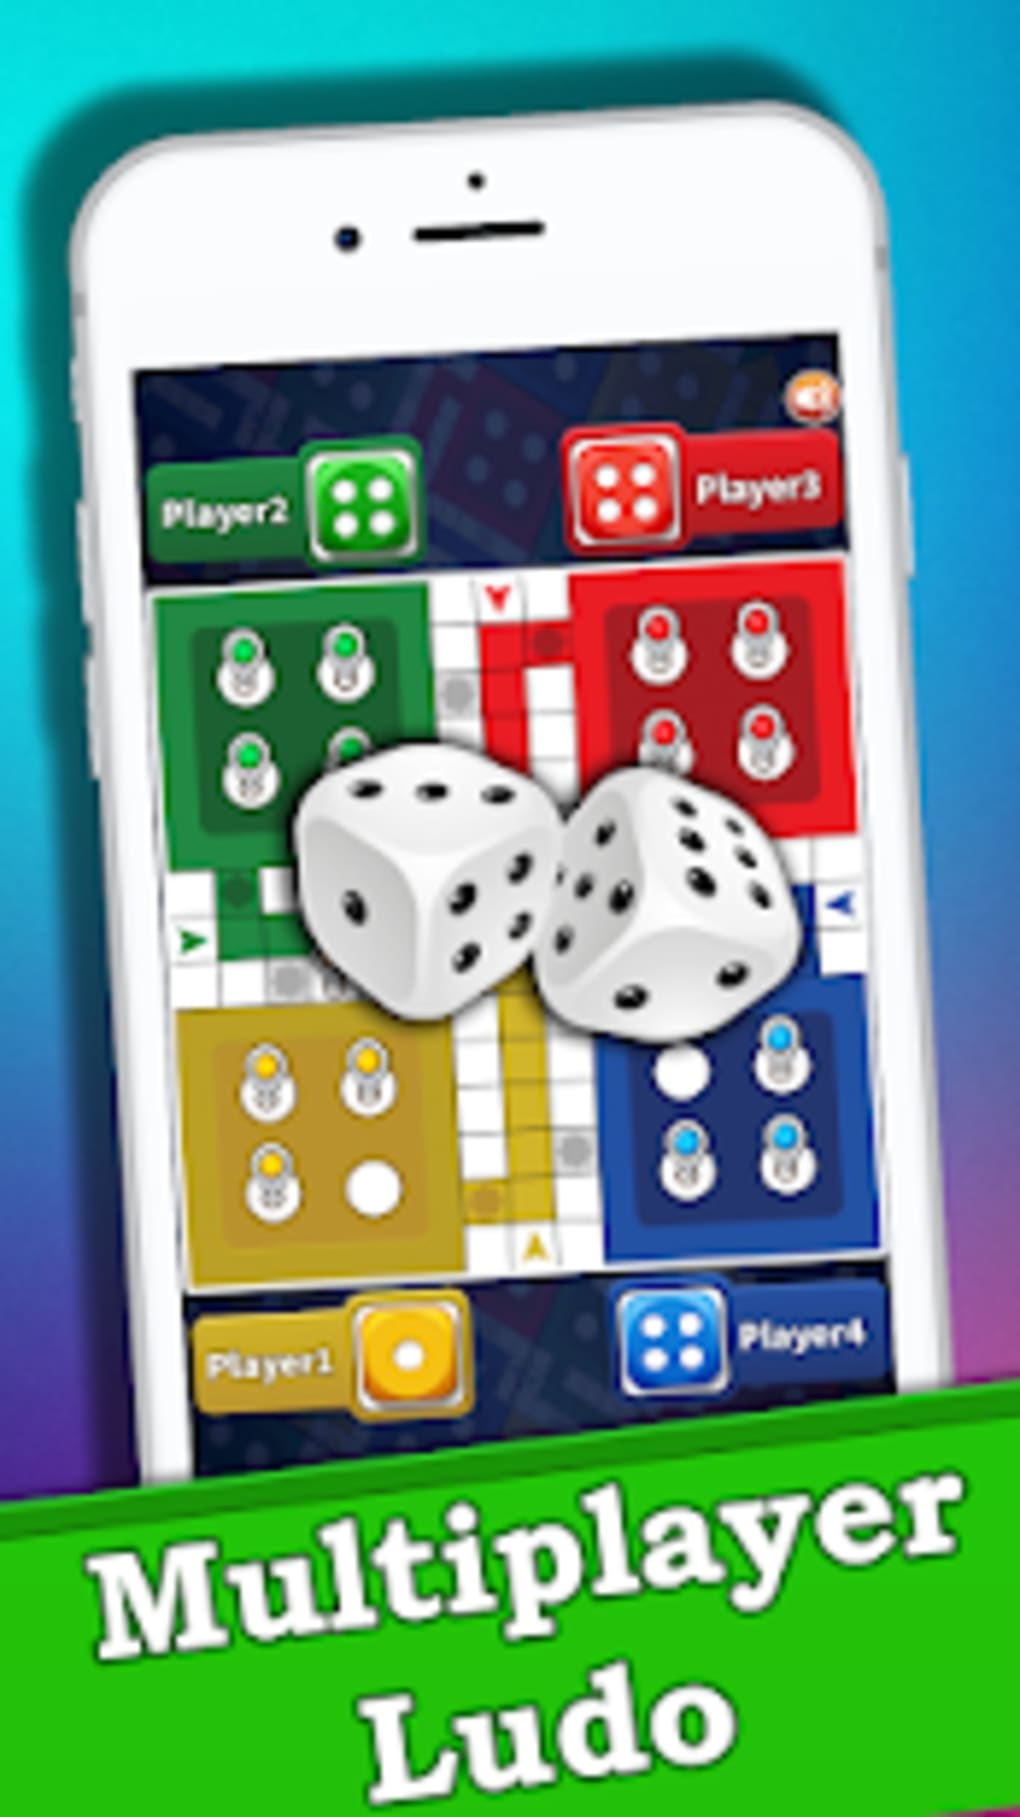 HD] Ludo Master Gameplay (Android)